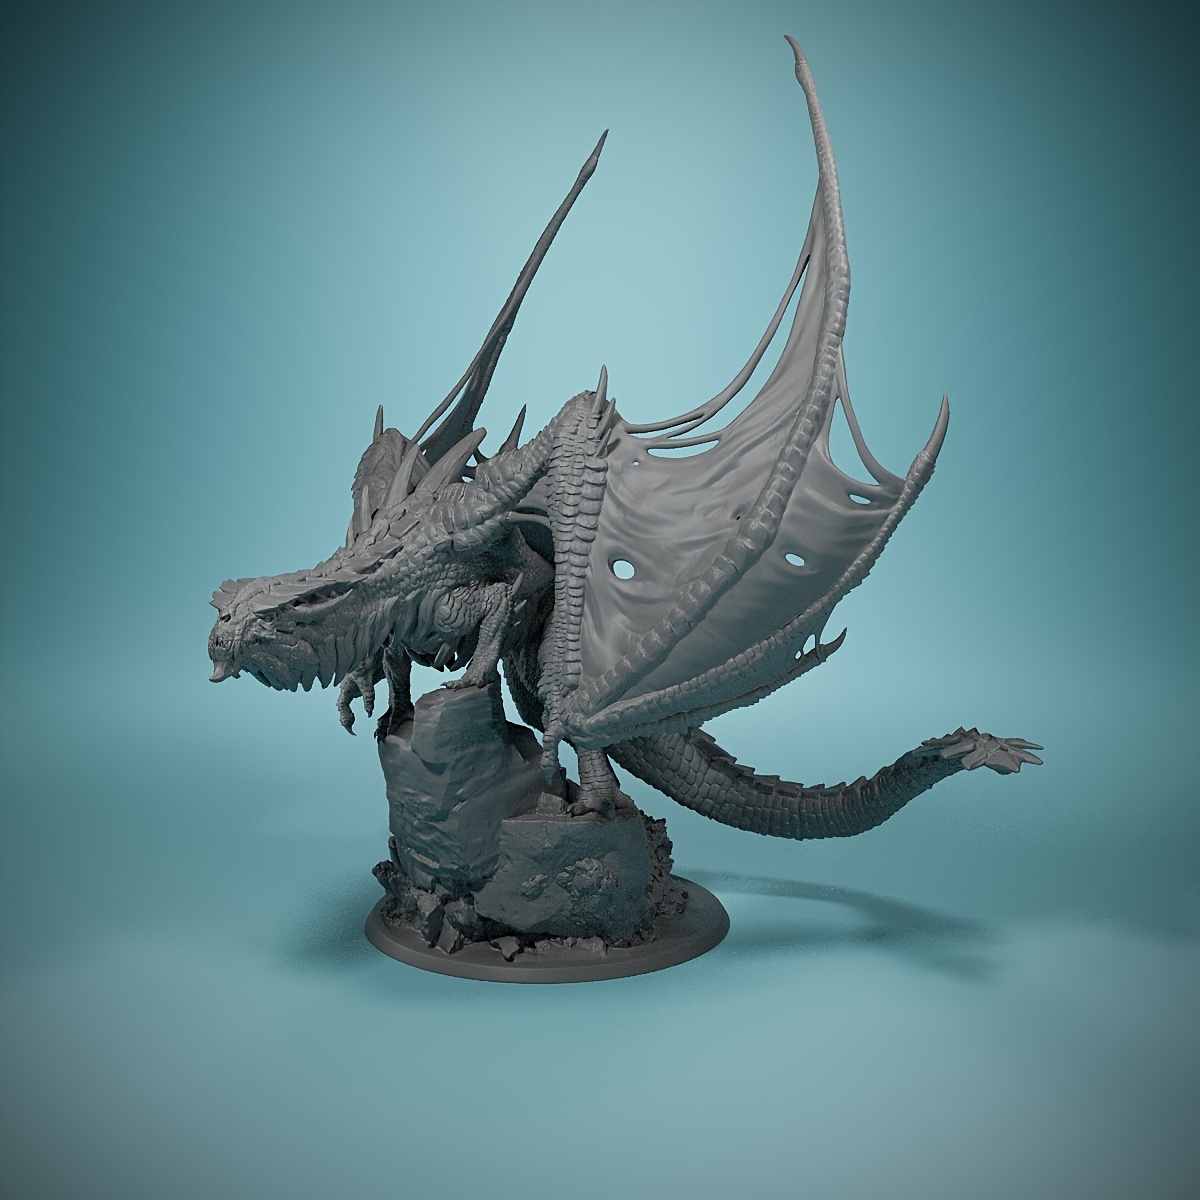 

14+ Resin Magma Dragon Miniature - D&d Tabletop Role Playing Game Figurine, Unpainted Diy Craft Kit, Ideal For Game Room Decor & Gifts